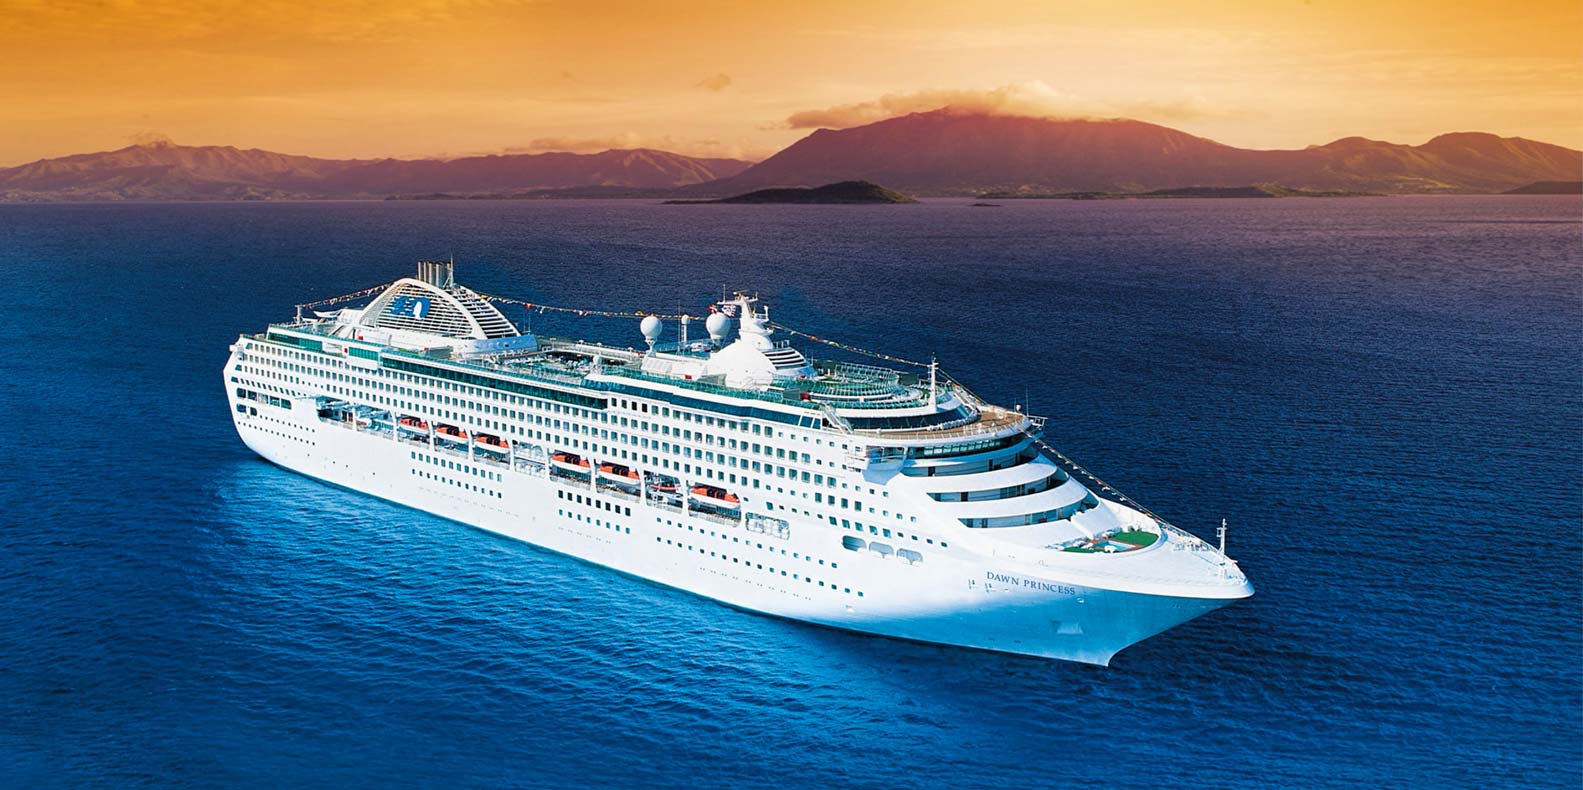 Luxury Cruise Tours 2019 Industry Size, Trends, Global Growth, Insights and Forecast Research Report 2024